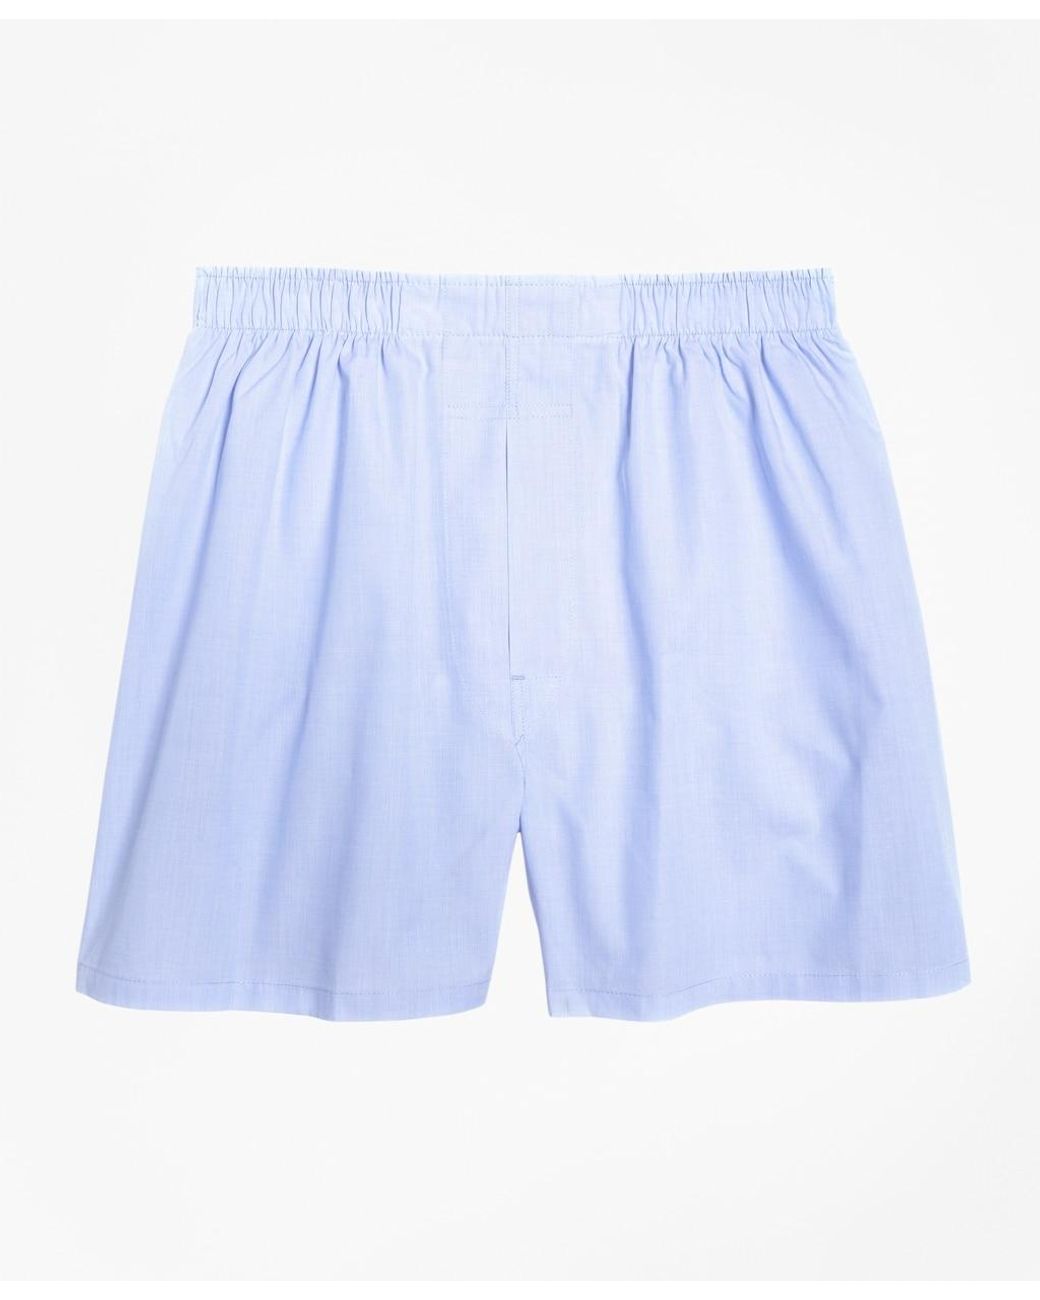 Brooks Brothers Relaxed Fit End-on-end Boxers in Blue for Men - Save 4% ...